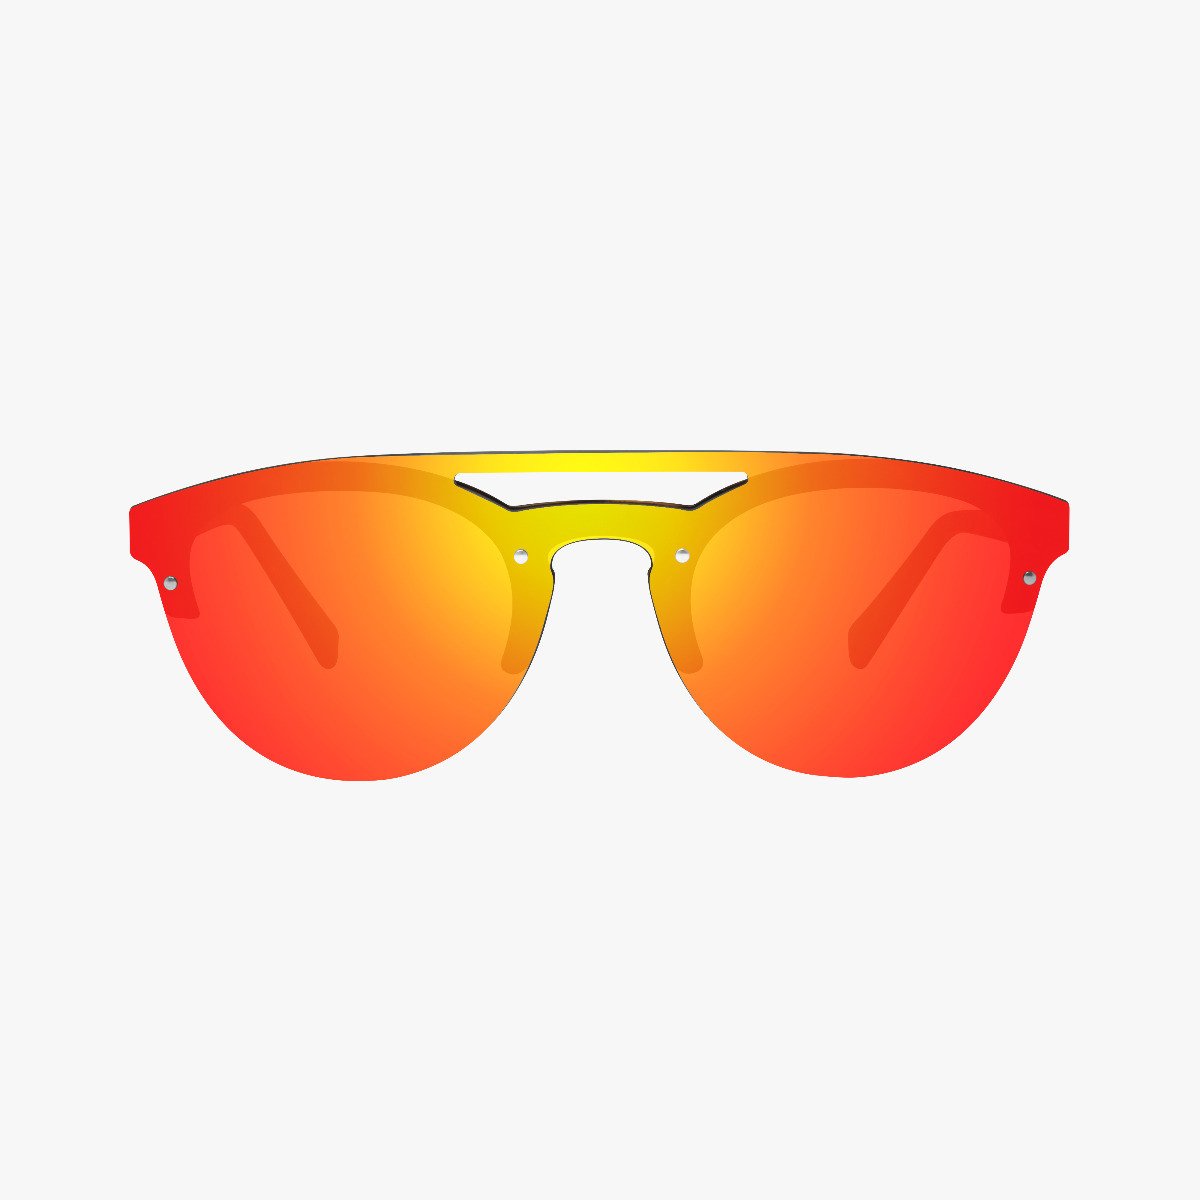 Scicon Sports | Cover Lifestyle Unisex Sunglasses - Demi Frame, Red Lens - EY160606